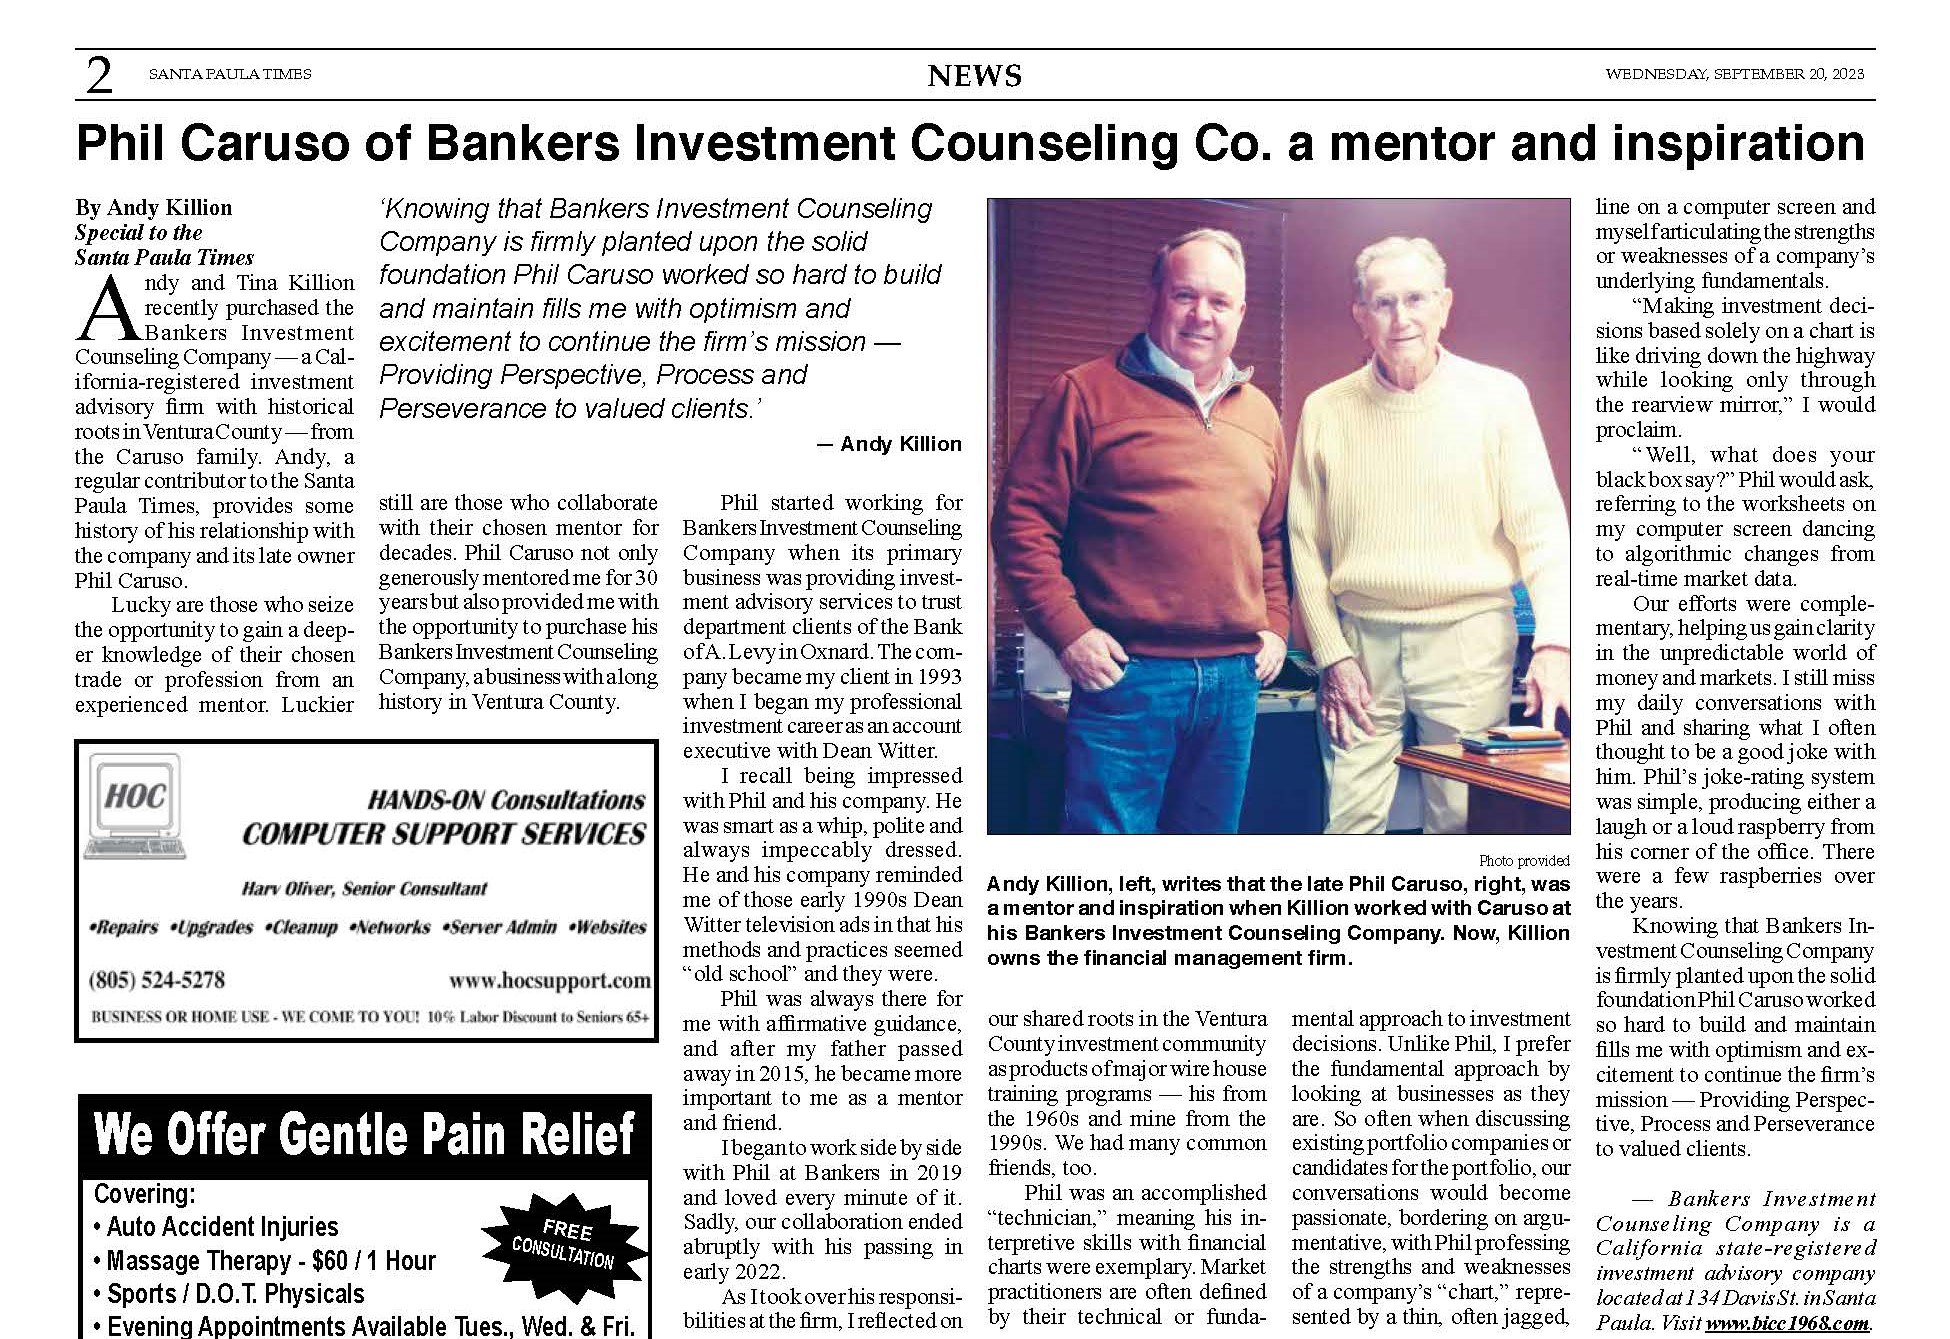 Phil Caruso of Bankers Investment Counseling Co. a mentor and inspiration by Andy Killion for the Santa Paula Times